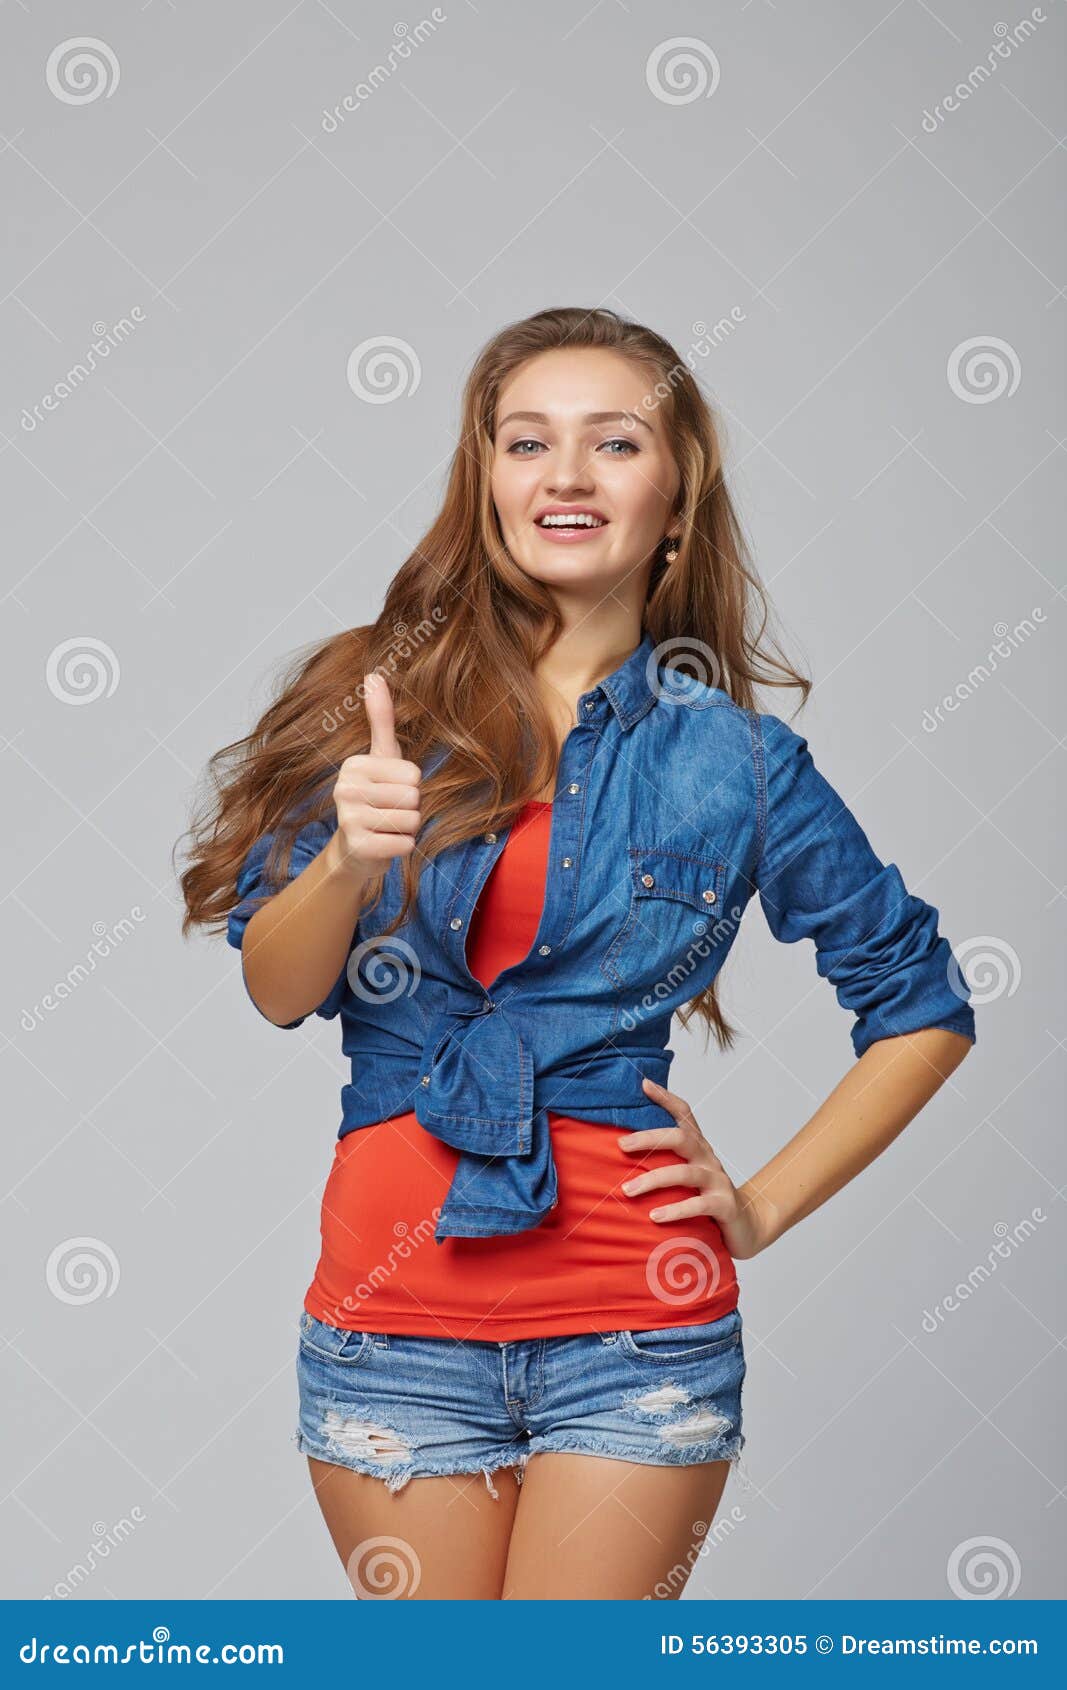 Full Length of Young Cute Smiling Emotional Girl Giving You Thumb Up ...